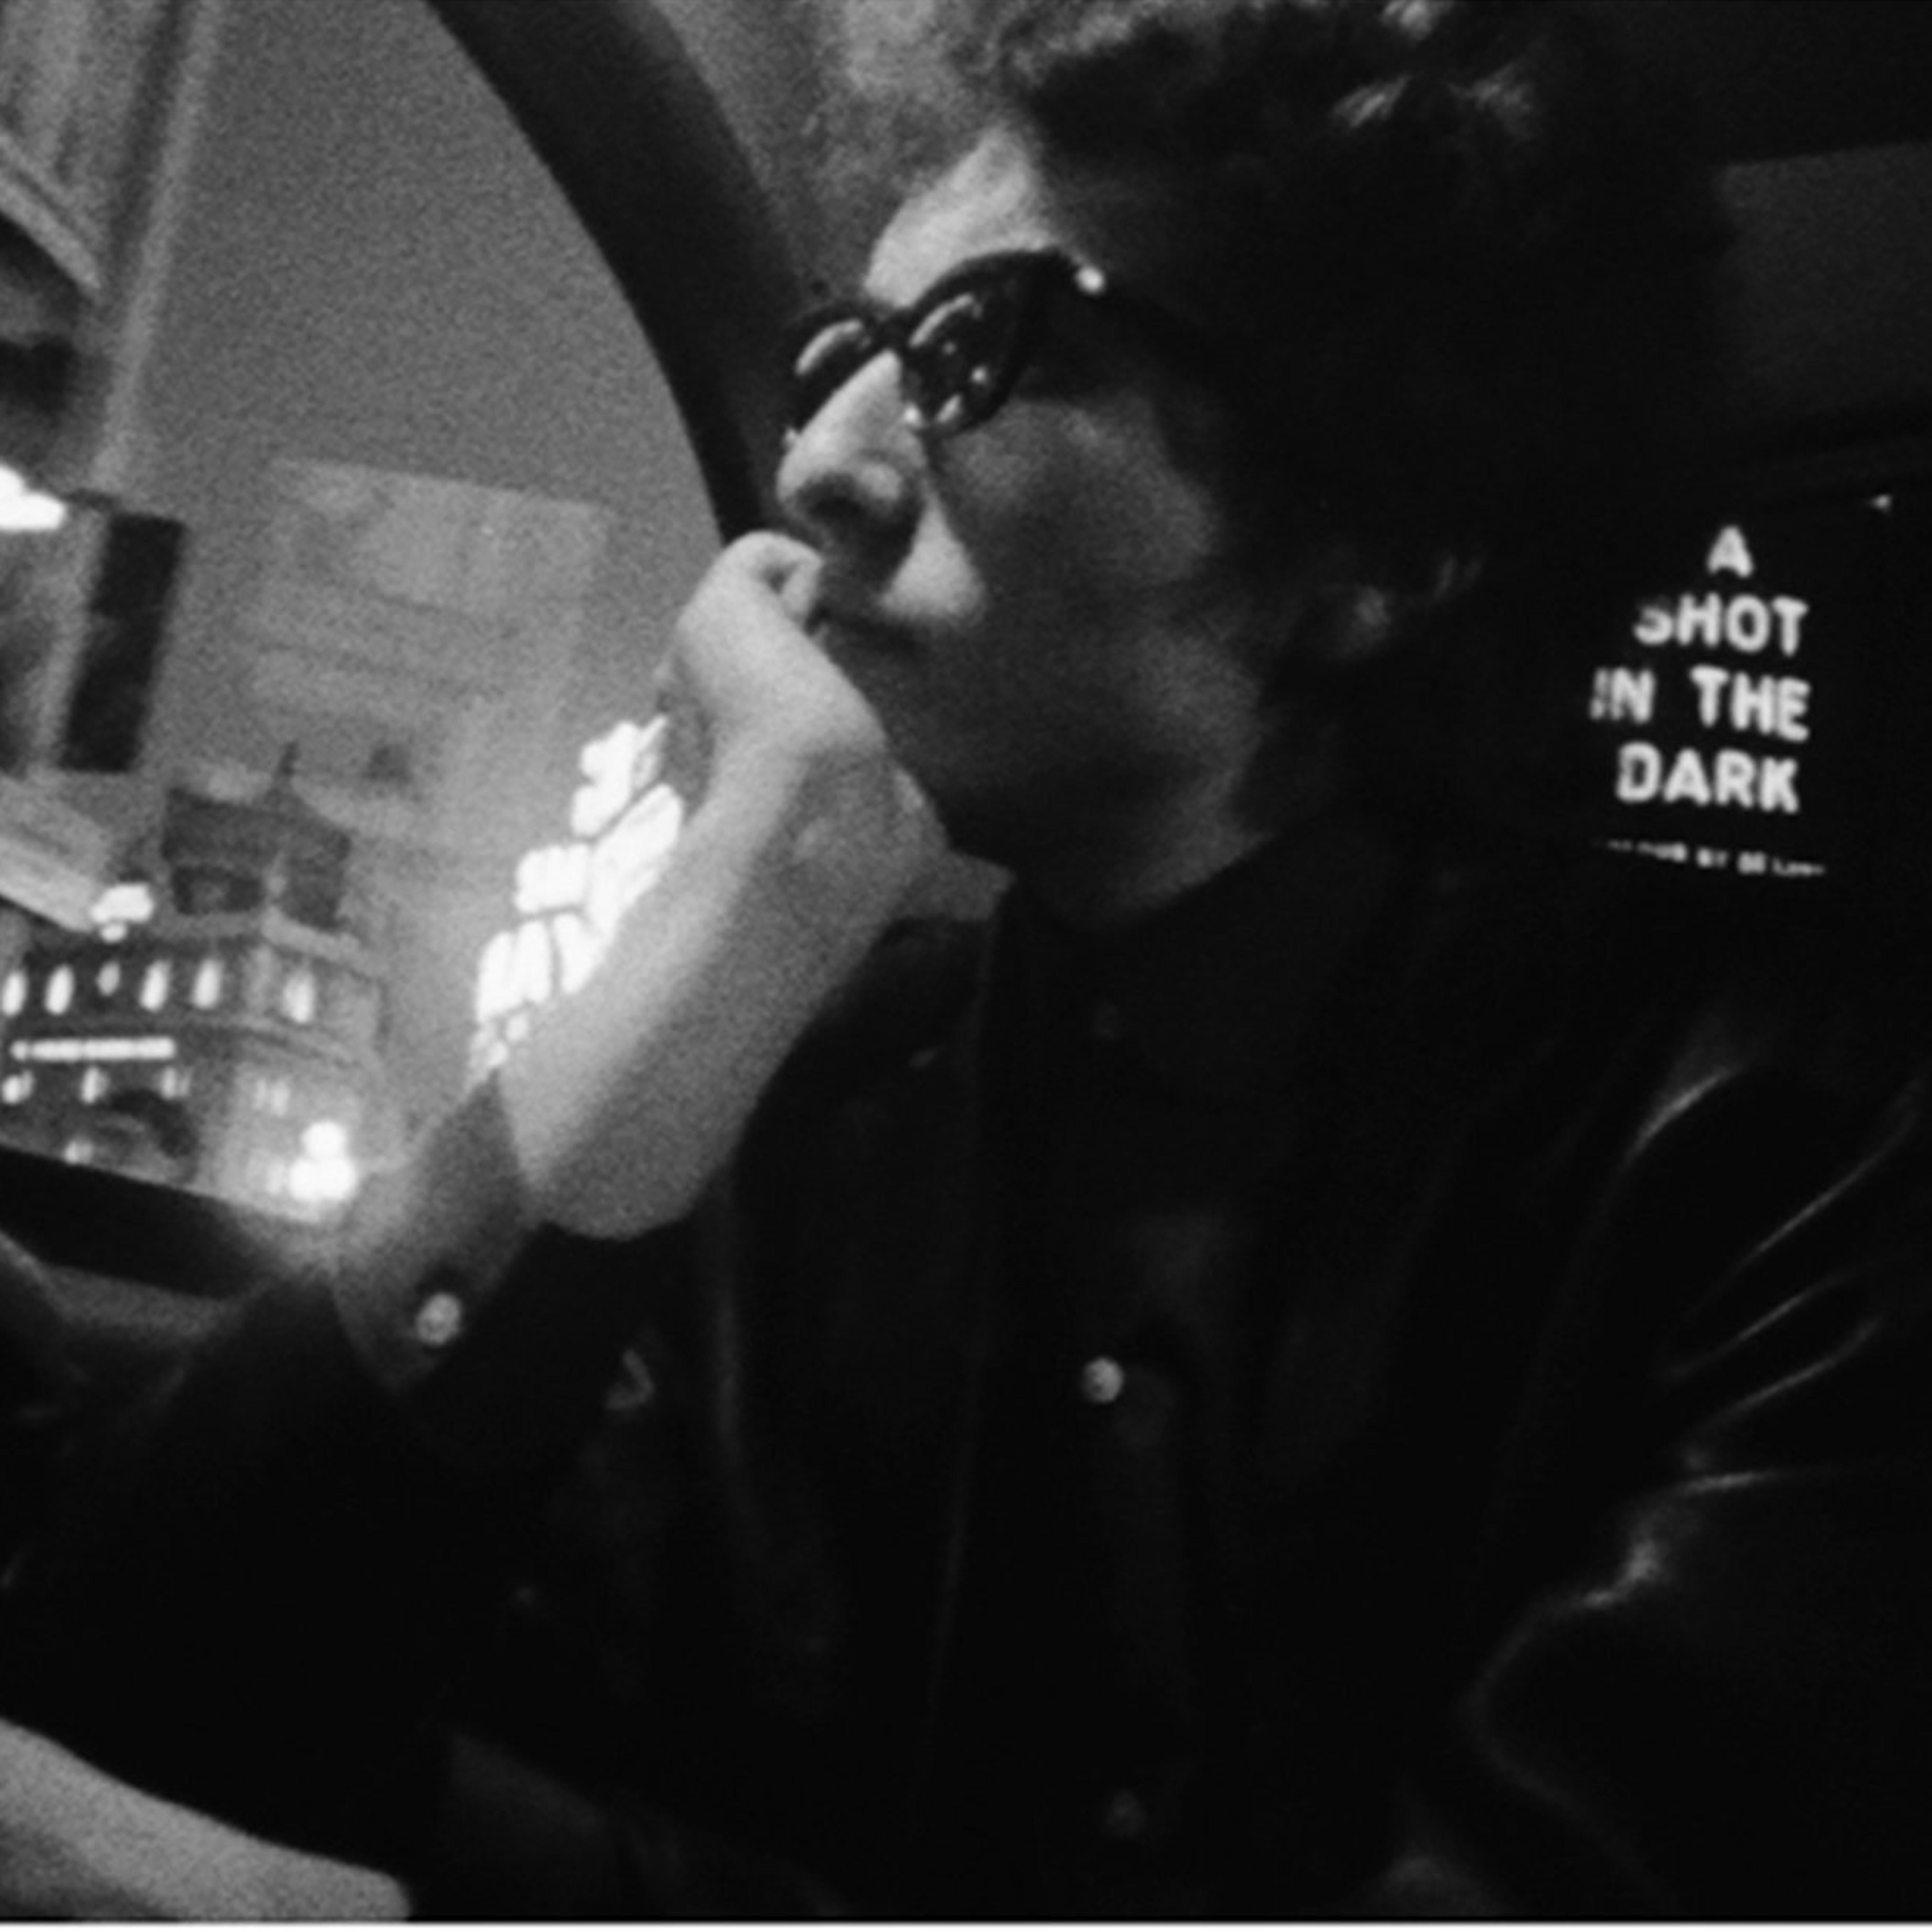 Bob Dylan en route after 1st show at Royal Albert Hall (tryptych)  - Black Black and White Photograph by D.A. Pennebaker